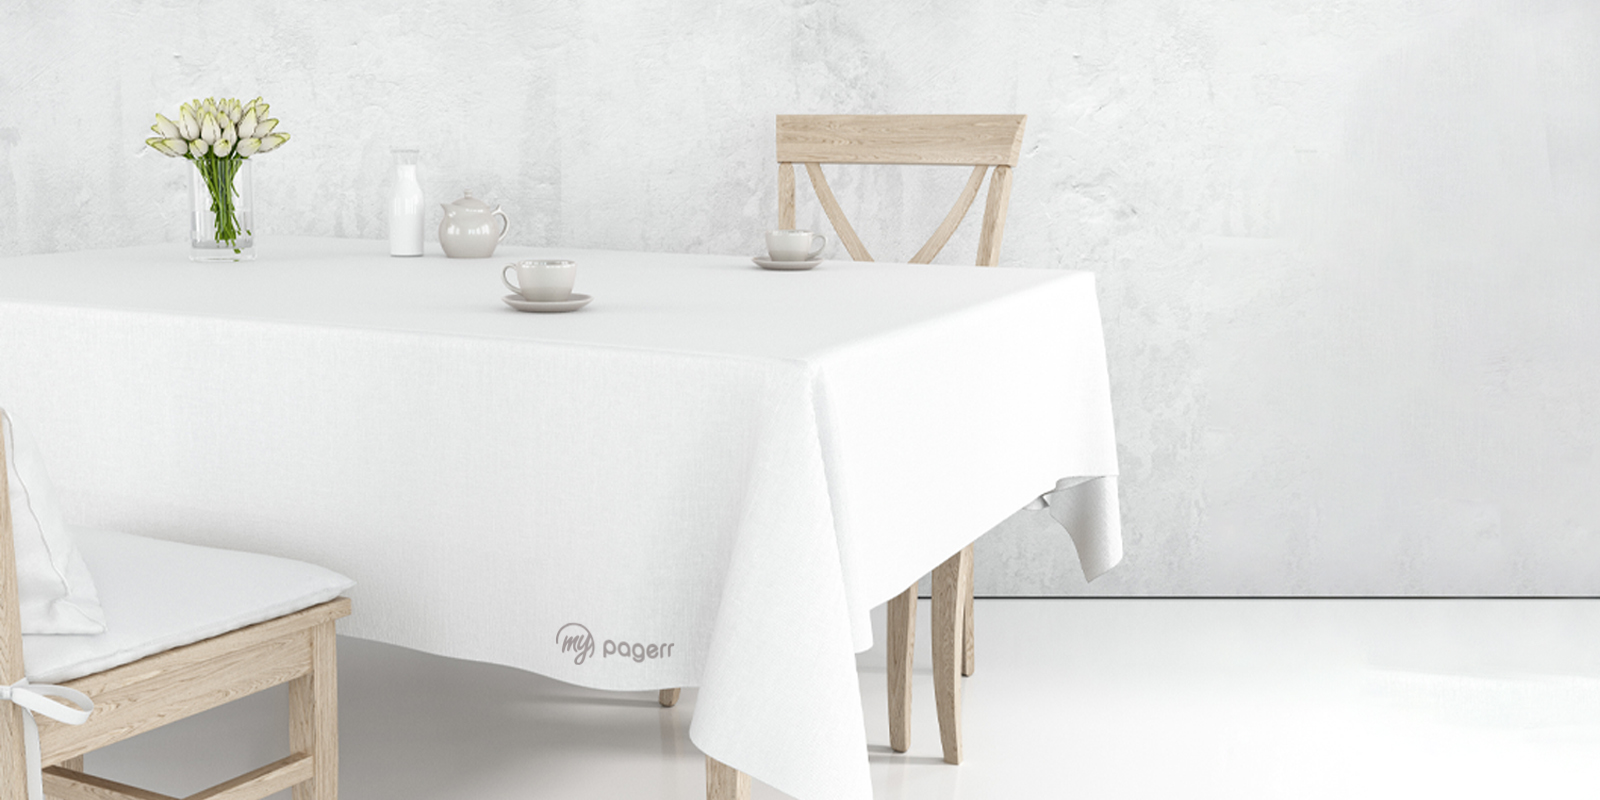 Tablecloths in Wollongong - Print with Pagerr